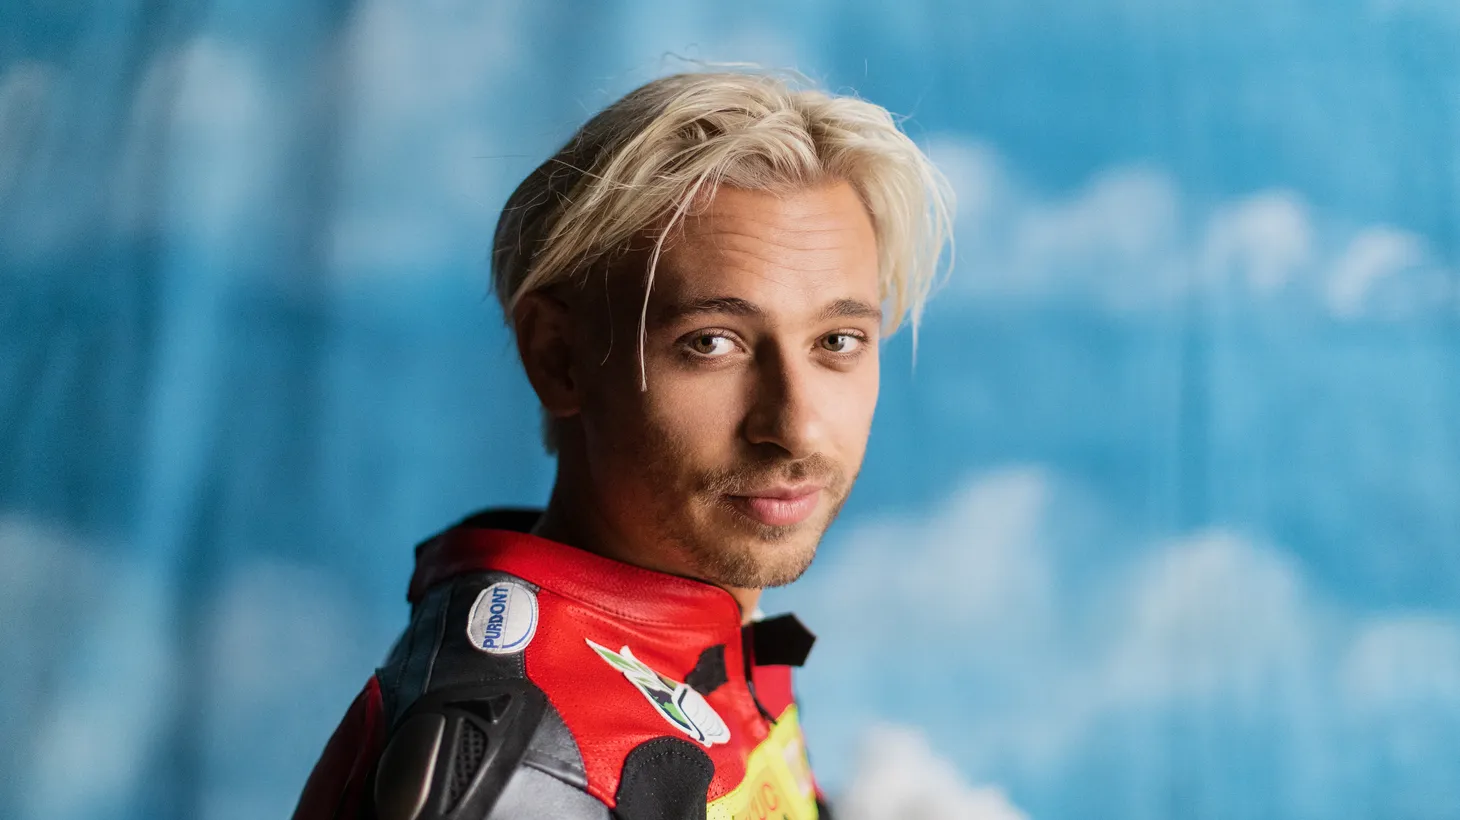 When asked about his song “Say Nothing” featuring MAY-A, Grammy Award-winning Australian artist Flume told us: “This song is about feelings of post-relationship clarity. We wrote the song midway through 2020 while the pandemic was still pretty new.